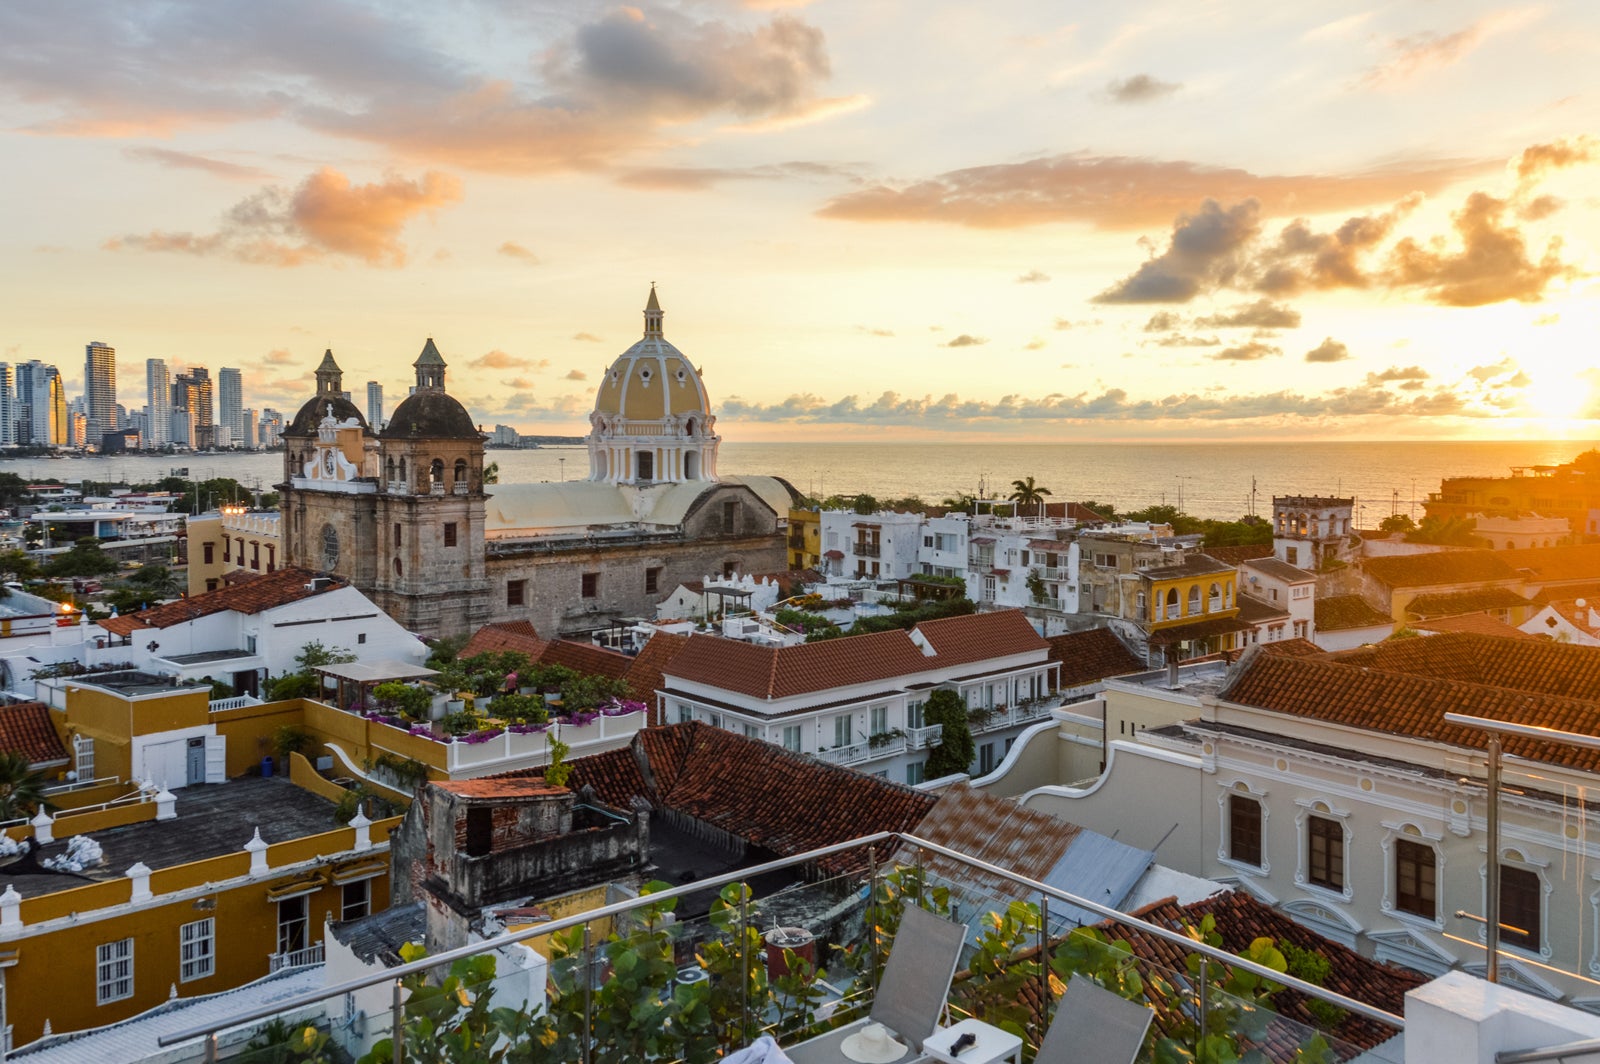 Sunset in Cartagena, Colombia